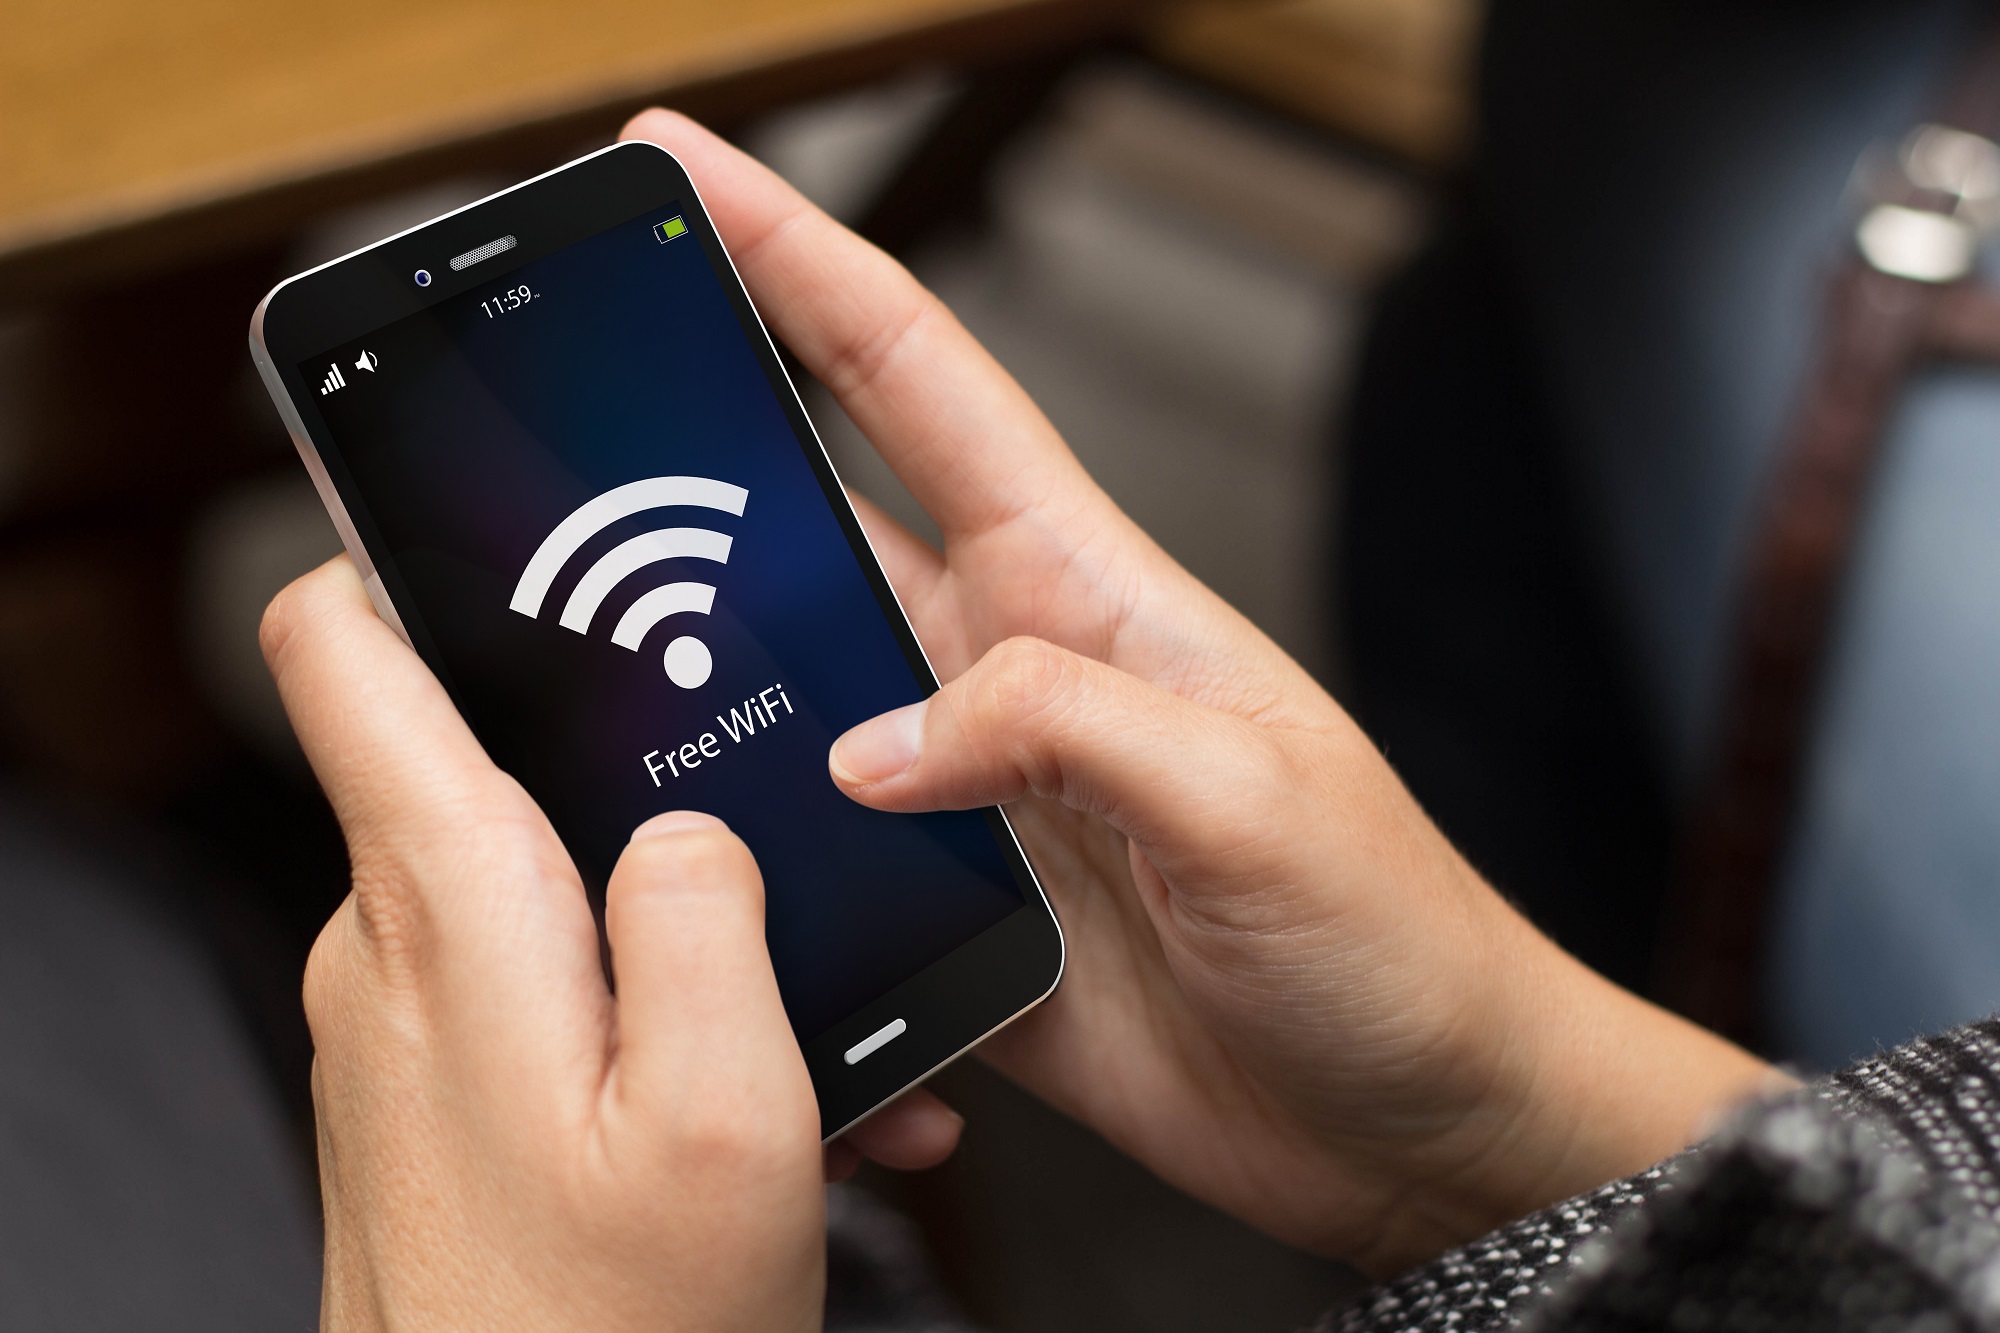 4 Simple Ways to Fix Your iPhone Cannot Connect to WiFi